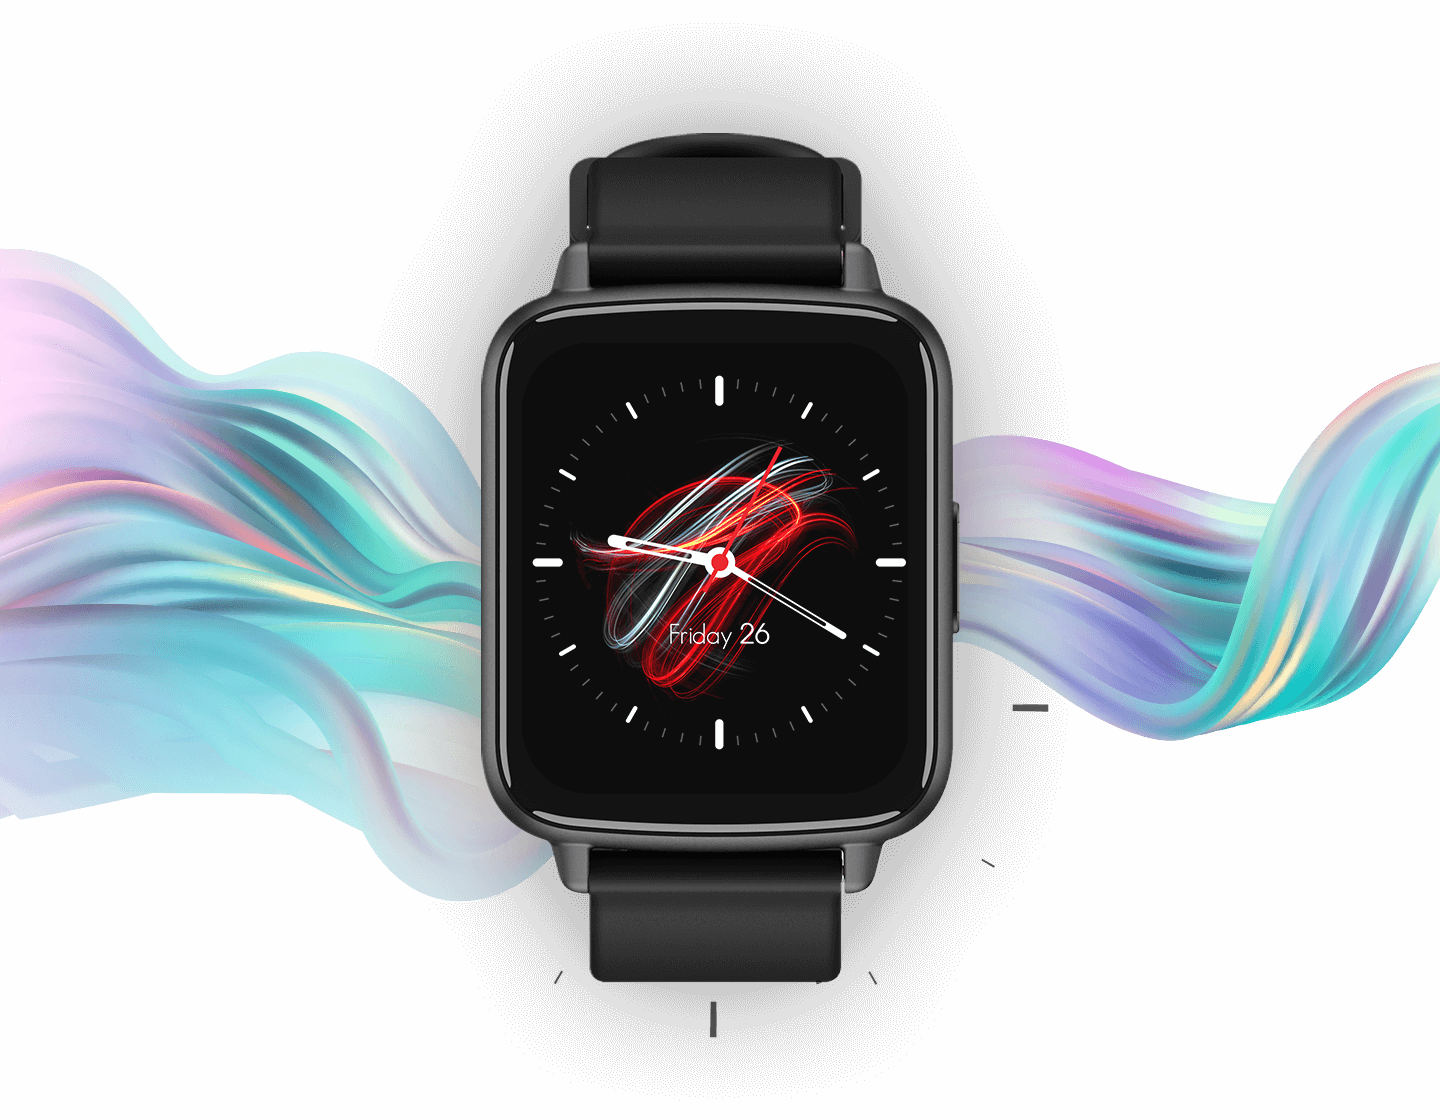 boAt Wave Neo | 1.69" HD Display, Upto 7 Days Battery Life, IP68 Sweat & Water Resistant, 100+ Watch Faces - boAt Lifestyle